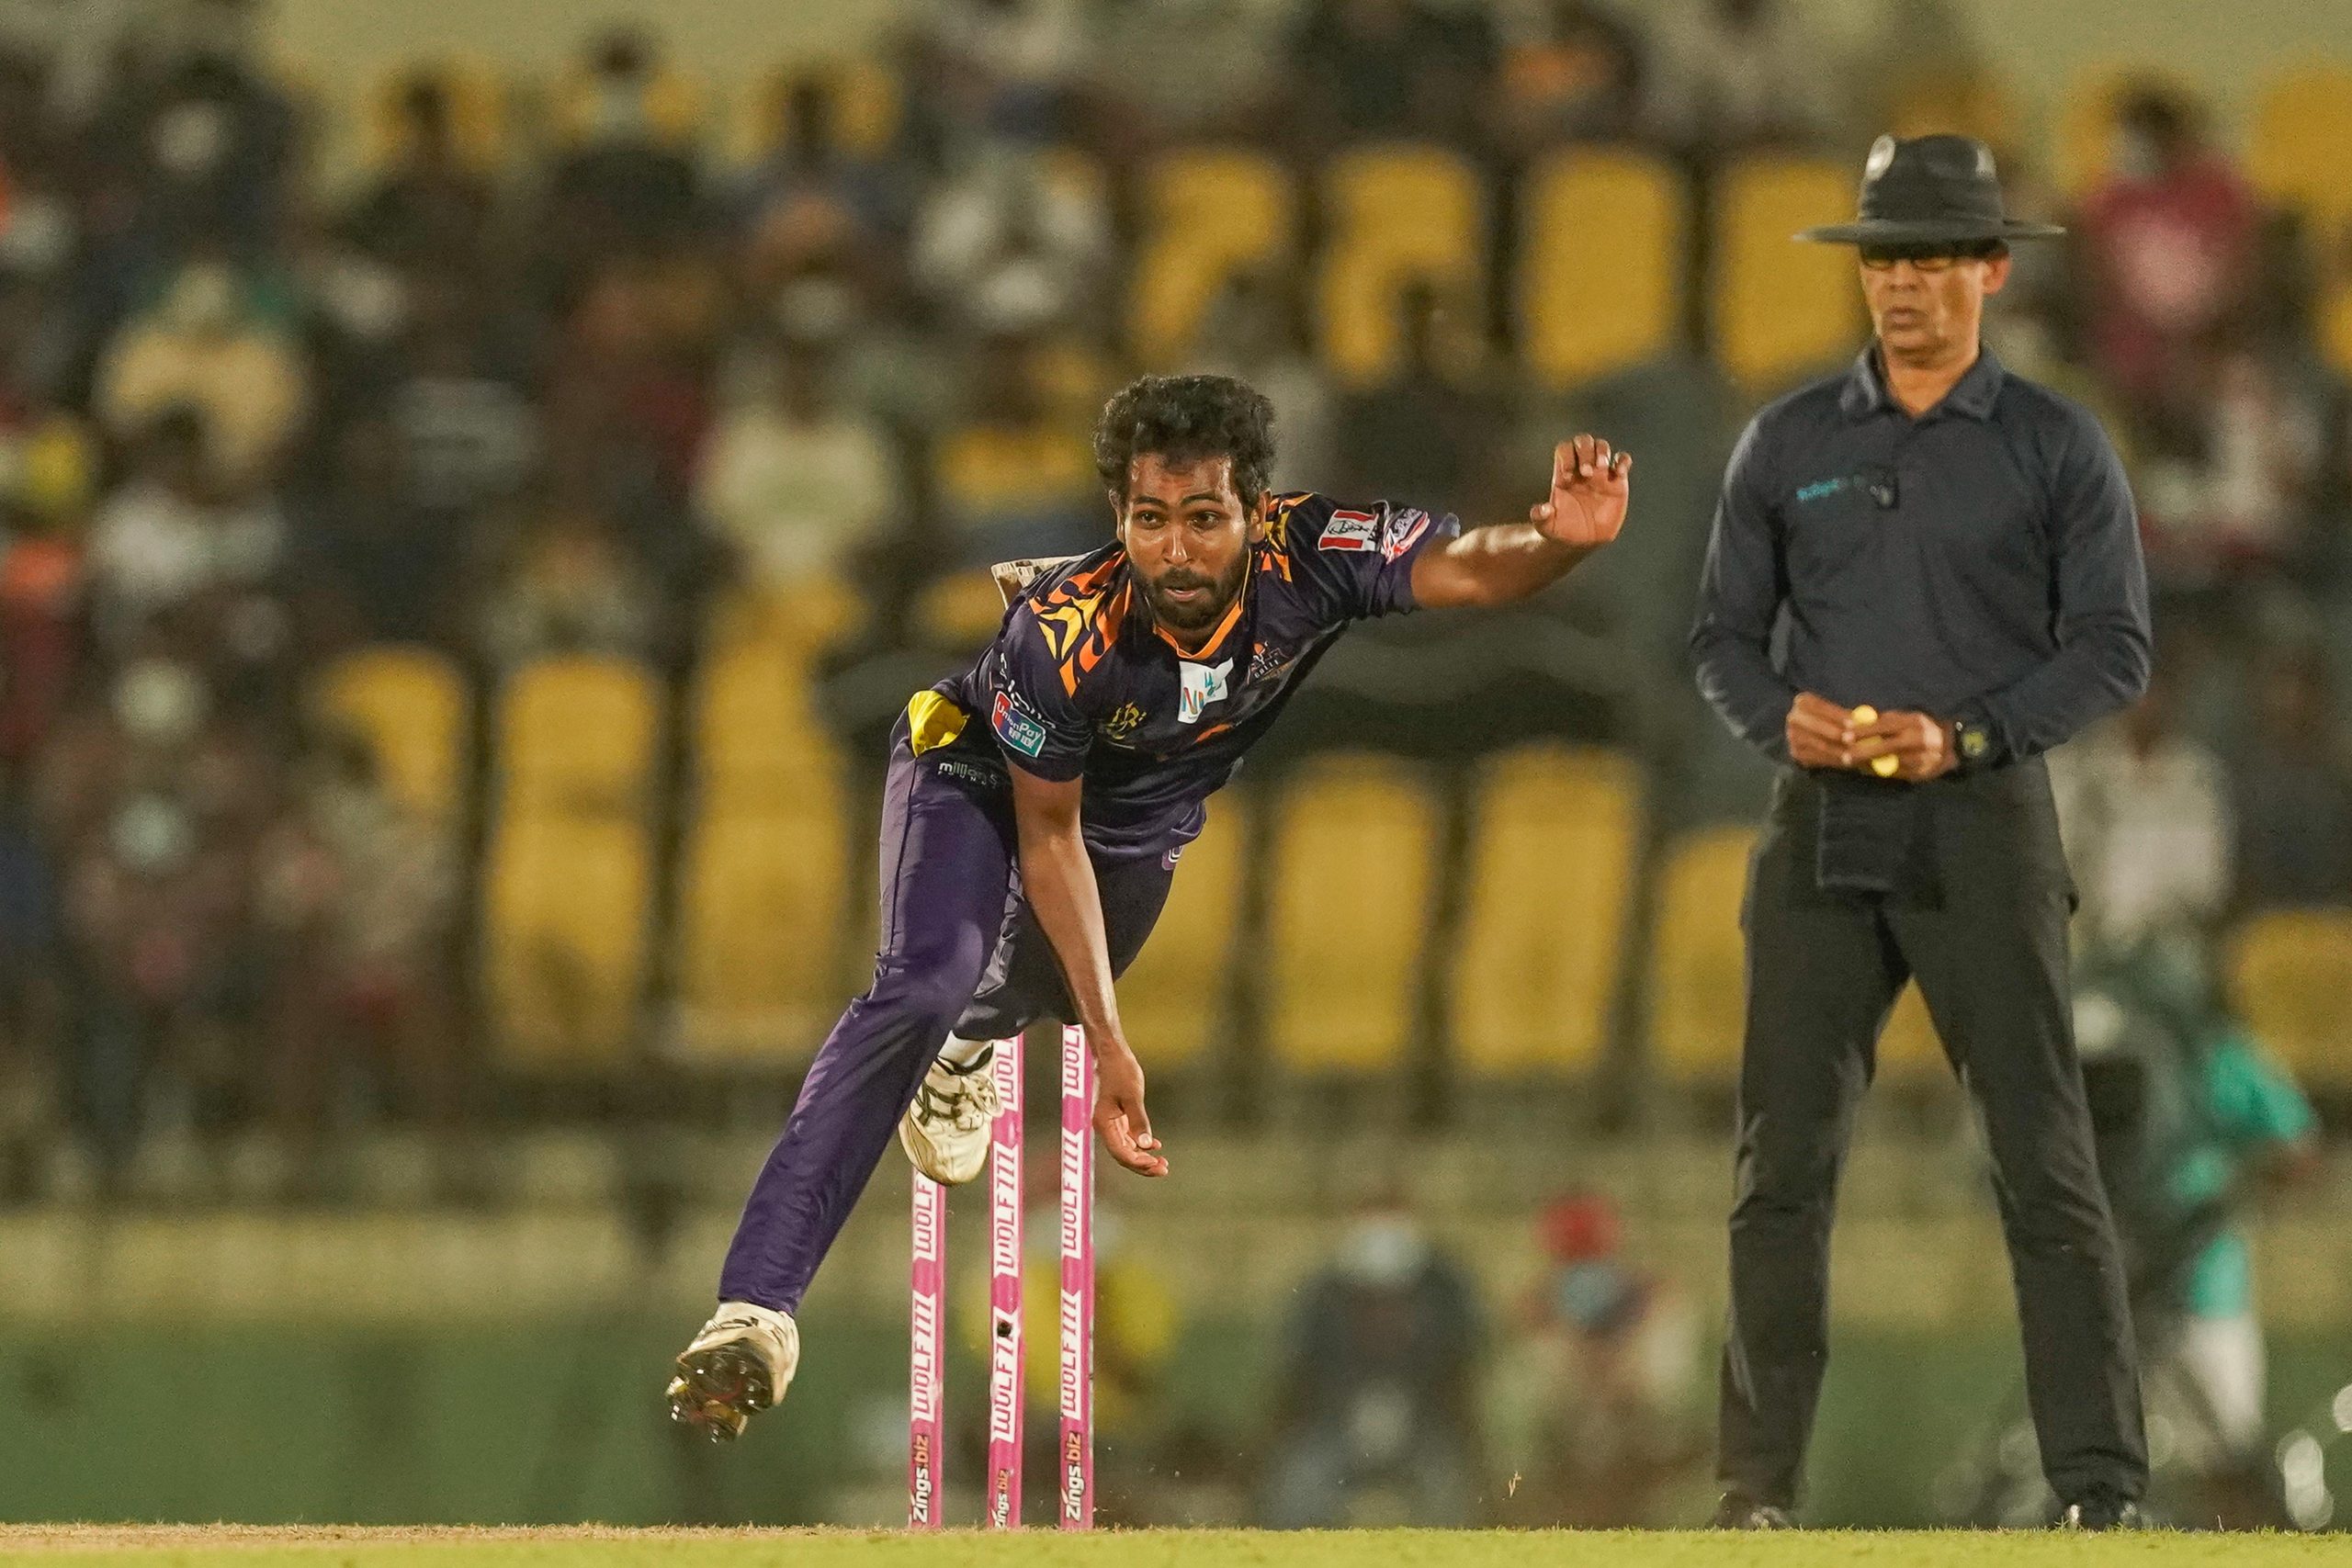 Nuwan Thushara tested positive for Covid-19